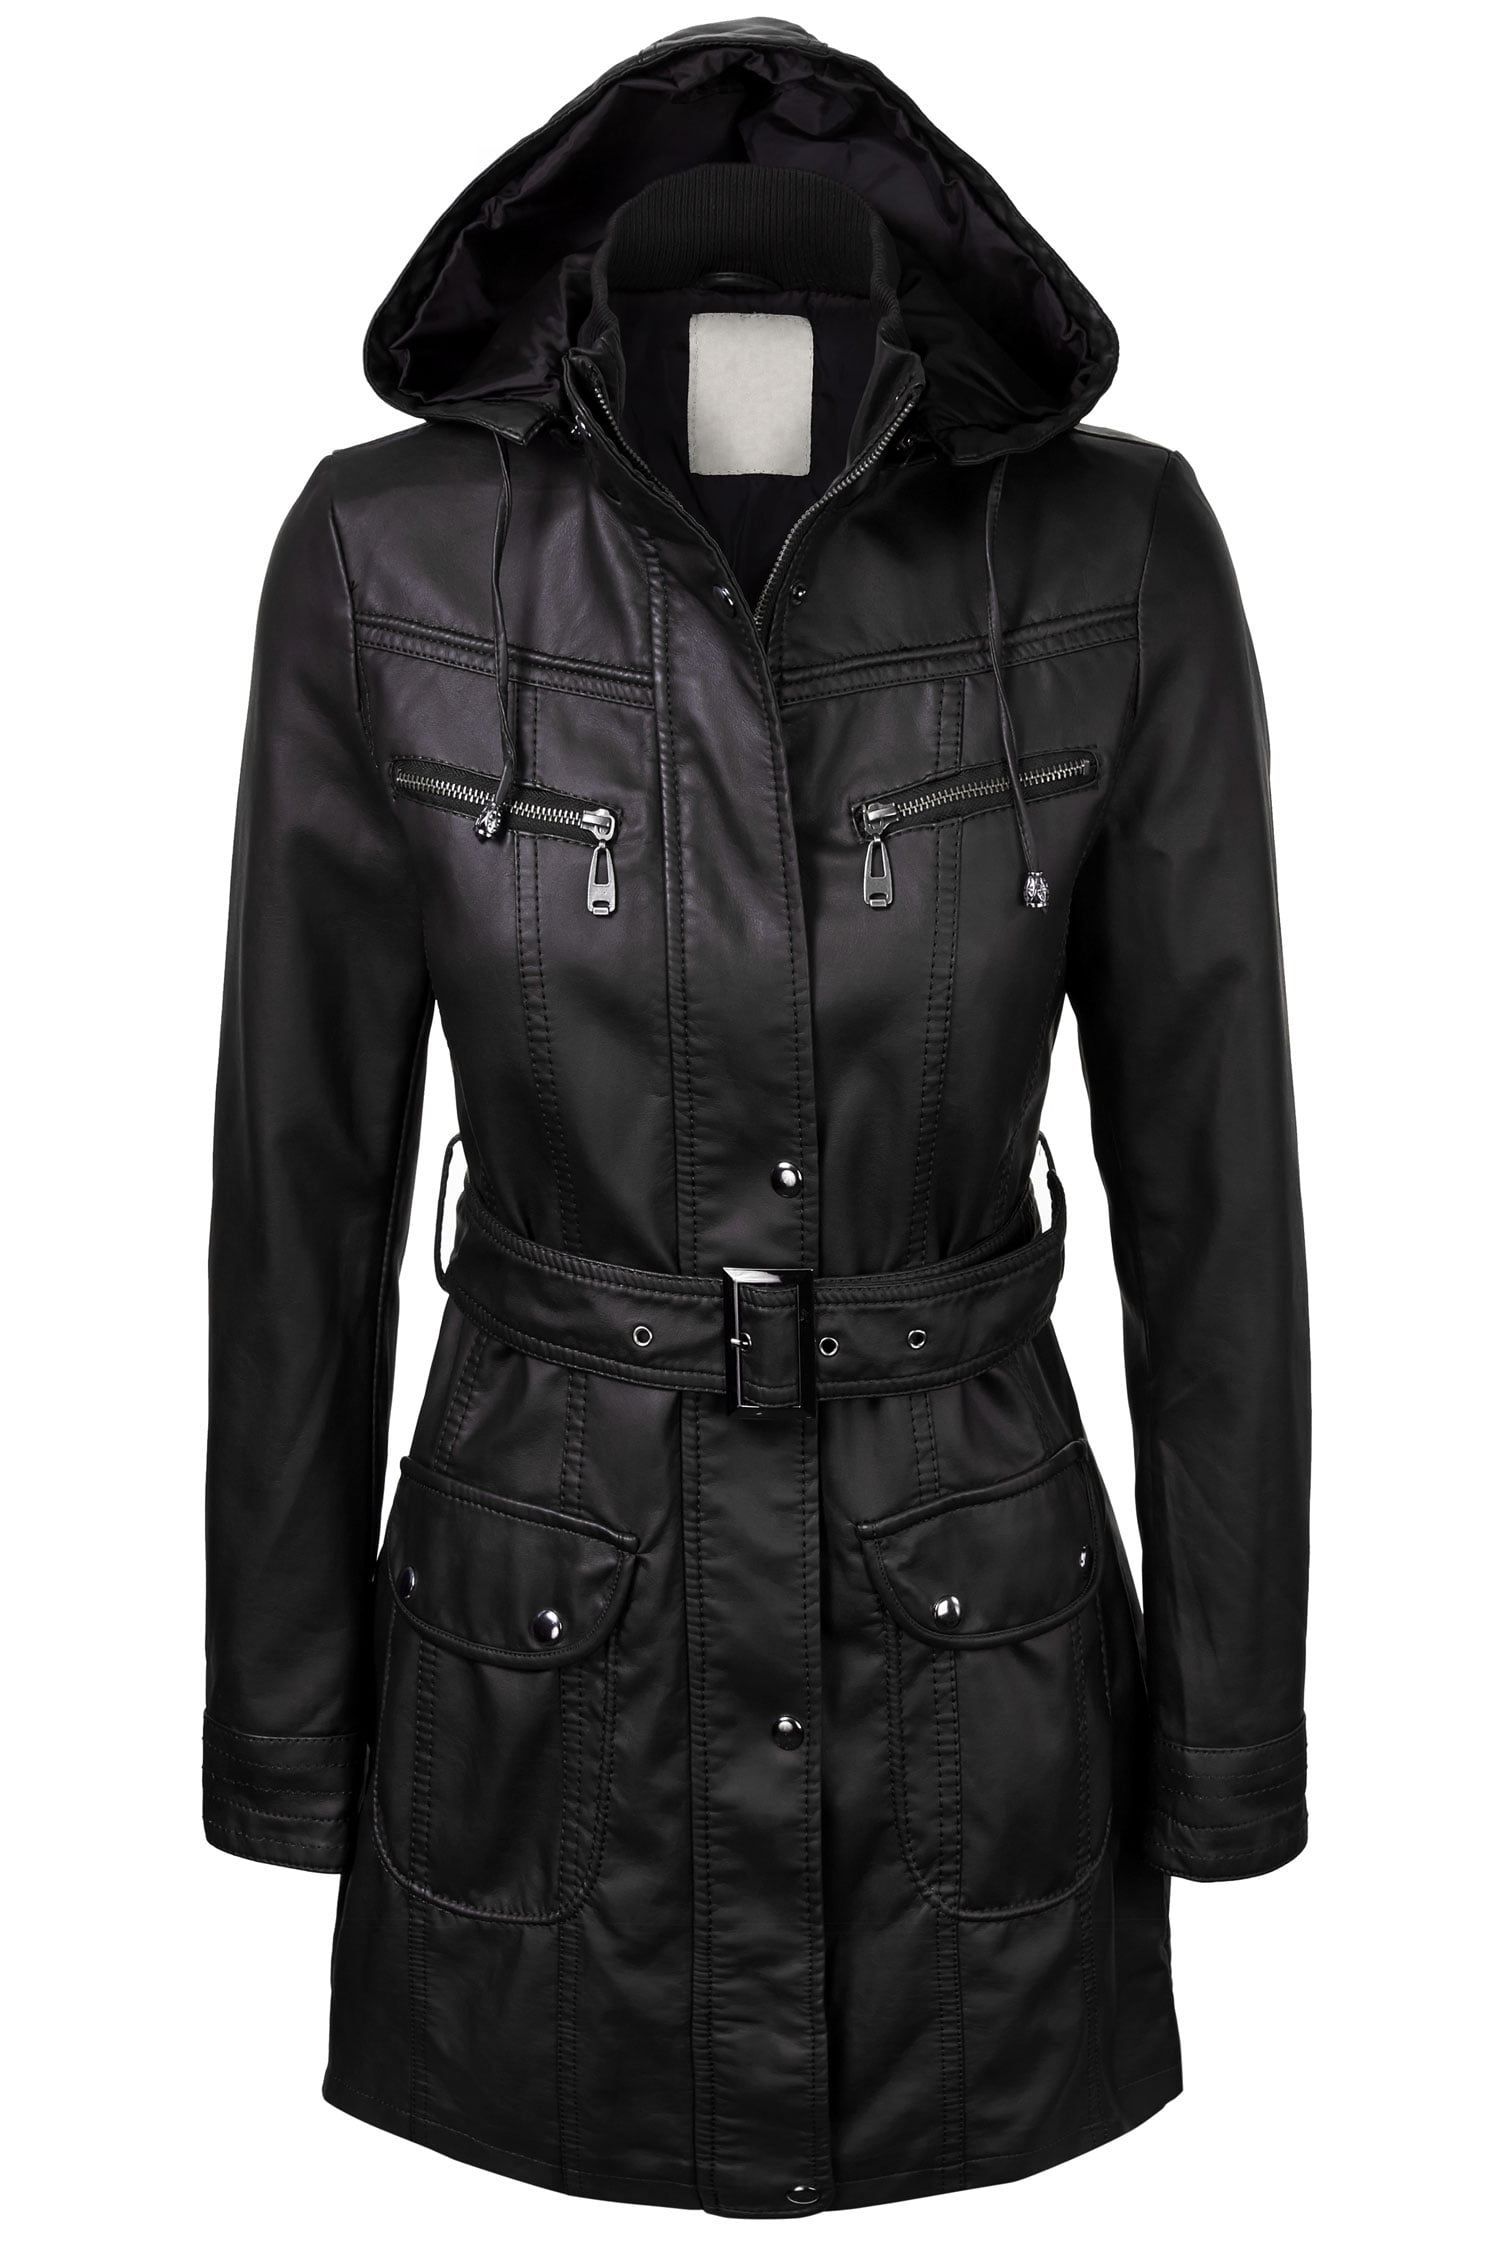 Women Ladies Trench Winter Leather Faux Warm Parka Hooded Coats Jacket Fur Tops